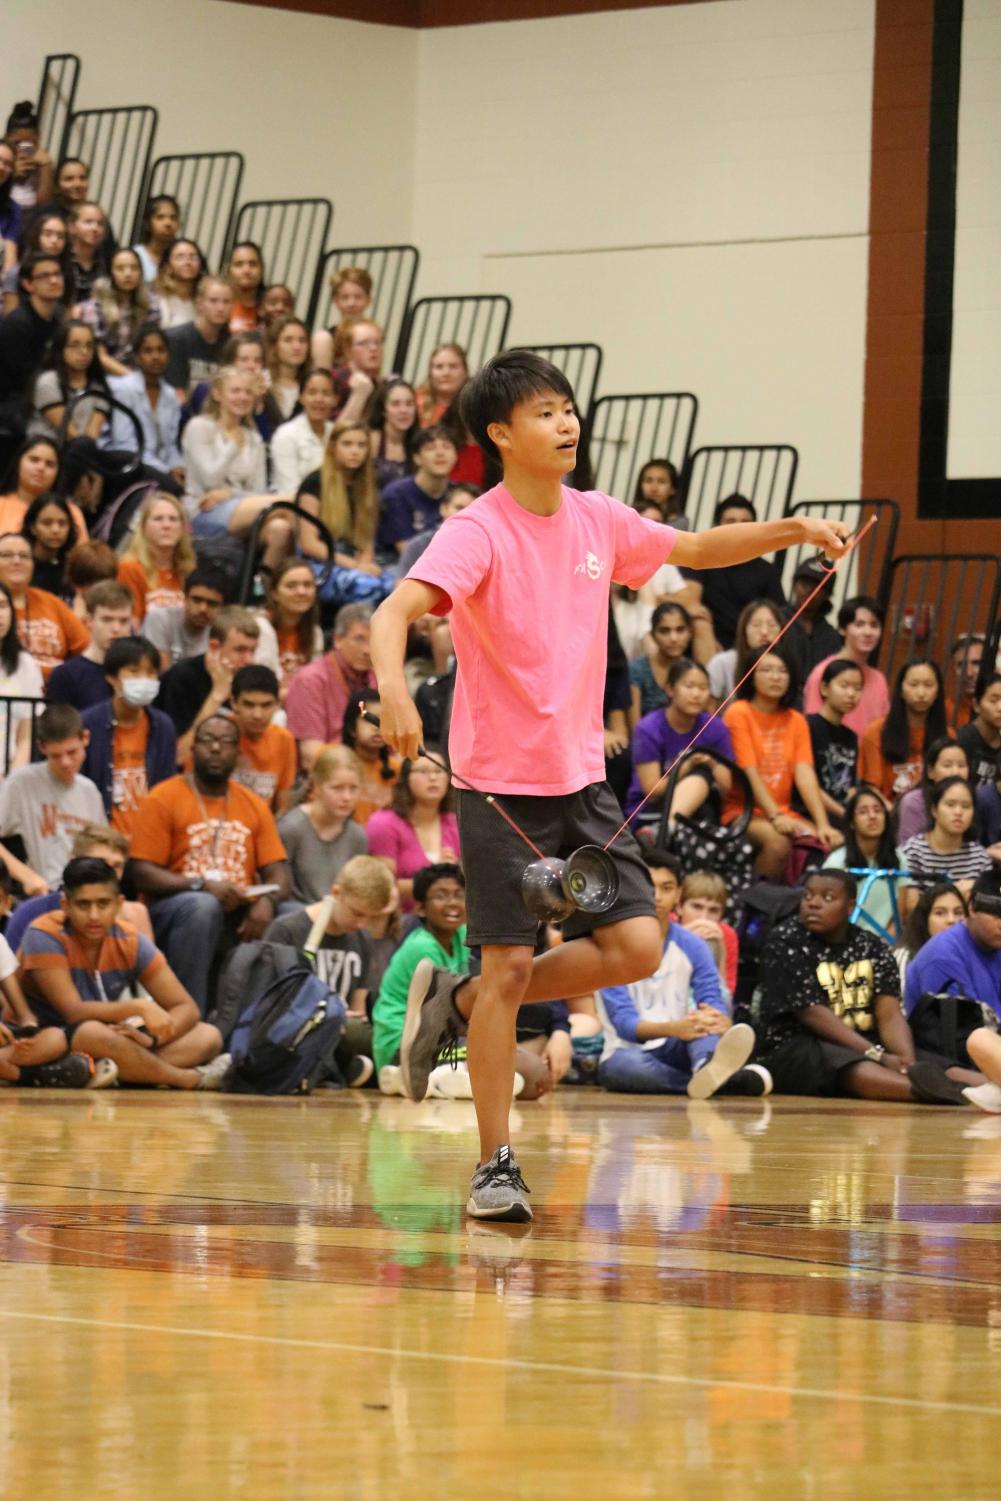 Students+Attend+First+Pep+Rally+of+Year